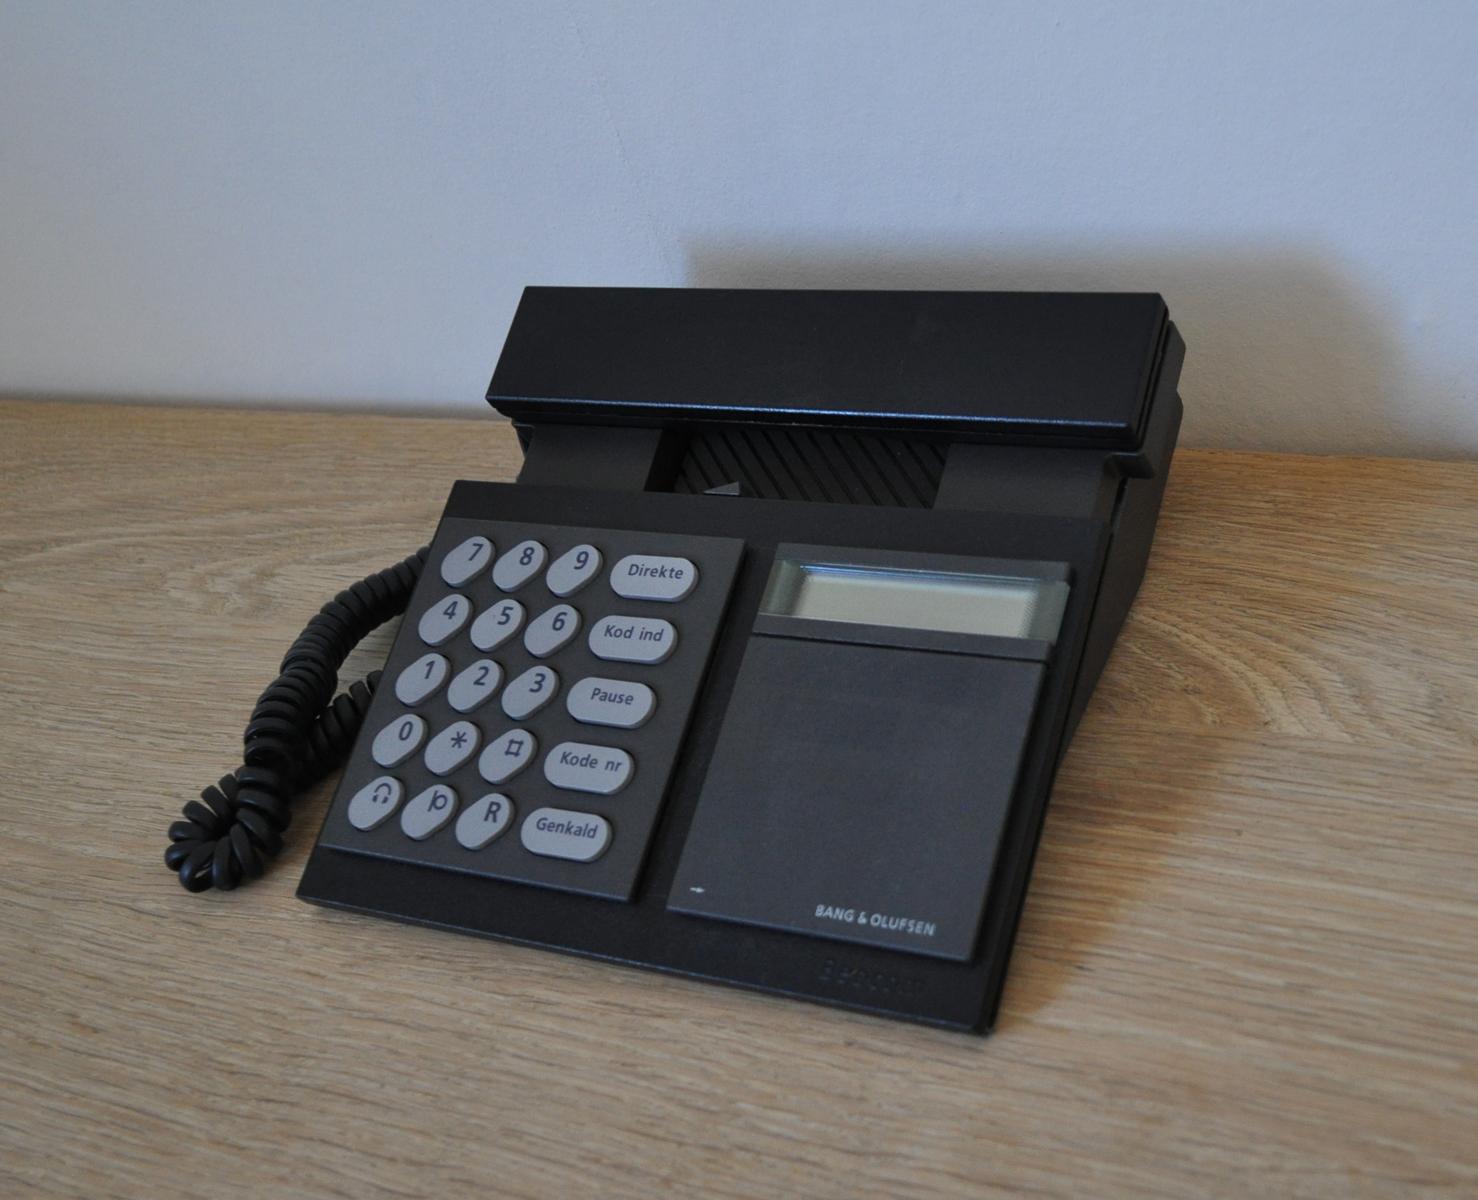 Beocom 2000 telephone from 1986 by Bang & Olusfen.
Fully functional.

History: 